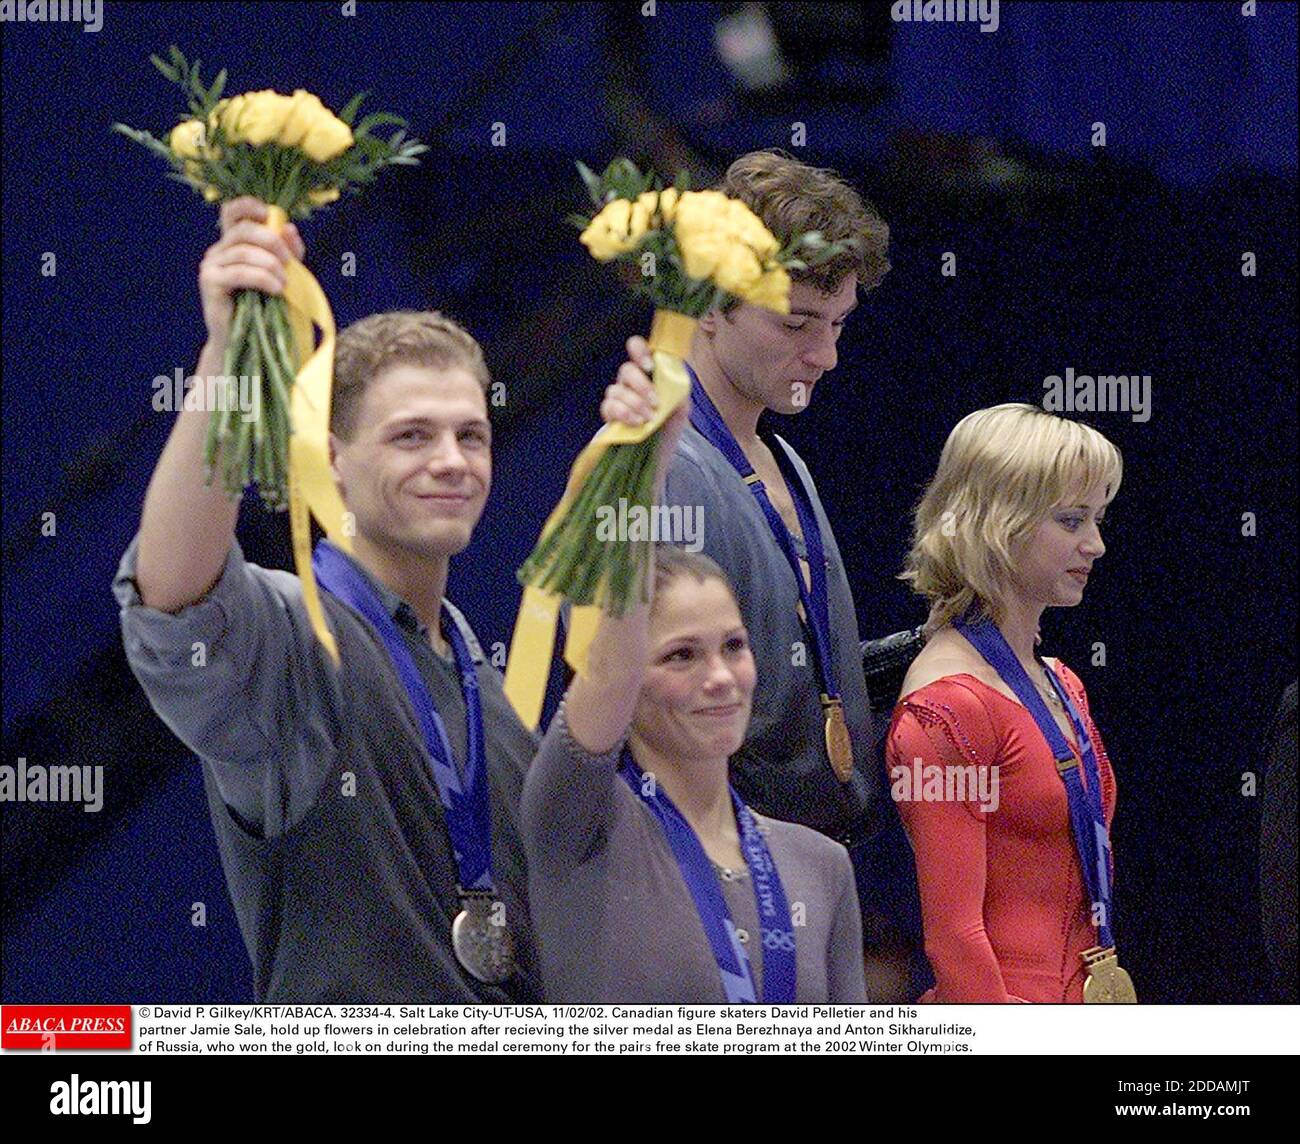 NO FILM, NO VIDEO, NO TV, NO DOCUMENTARY - © David P. Gilkey/KRT/ABACA. 32334-4. Salt Lake City-UT-USA, 11/02/02. Canadian figure skaters David Pelletier and his partner Jamie Sale, hold up flowers in celebration after recieving the silver medal as Elena Berezhnaya and Anton Sikharulidize, of Russ Stock Photo